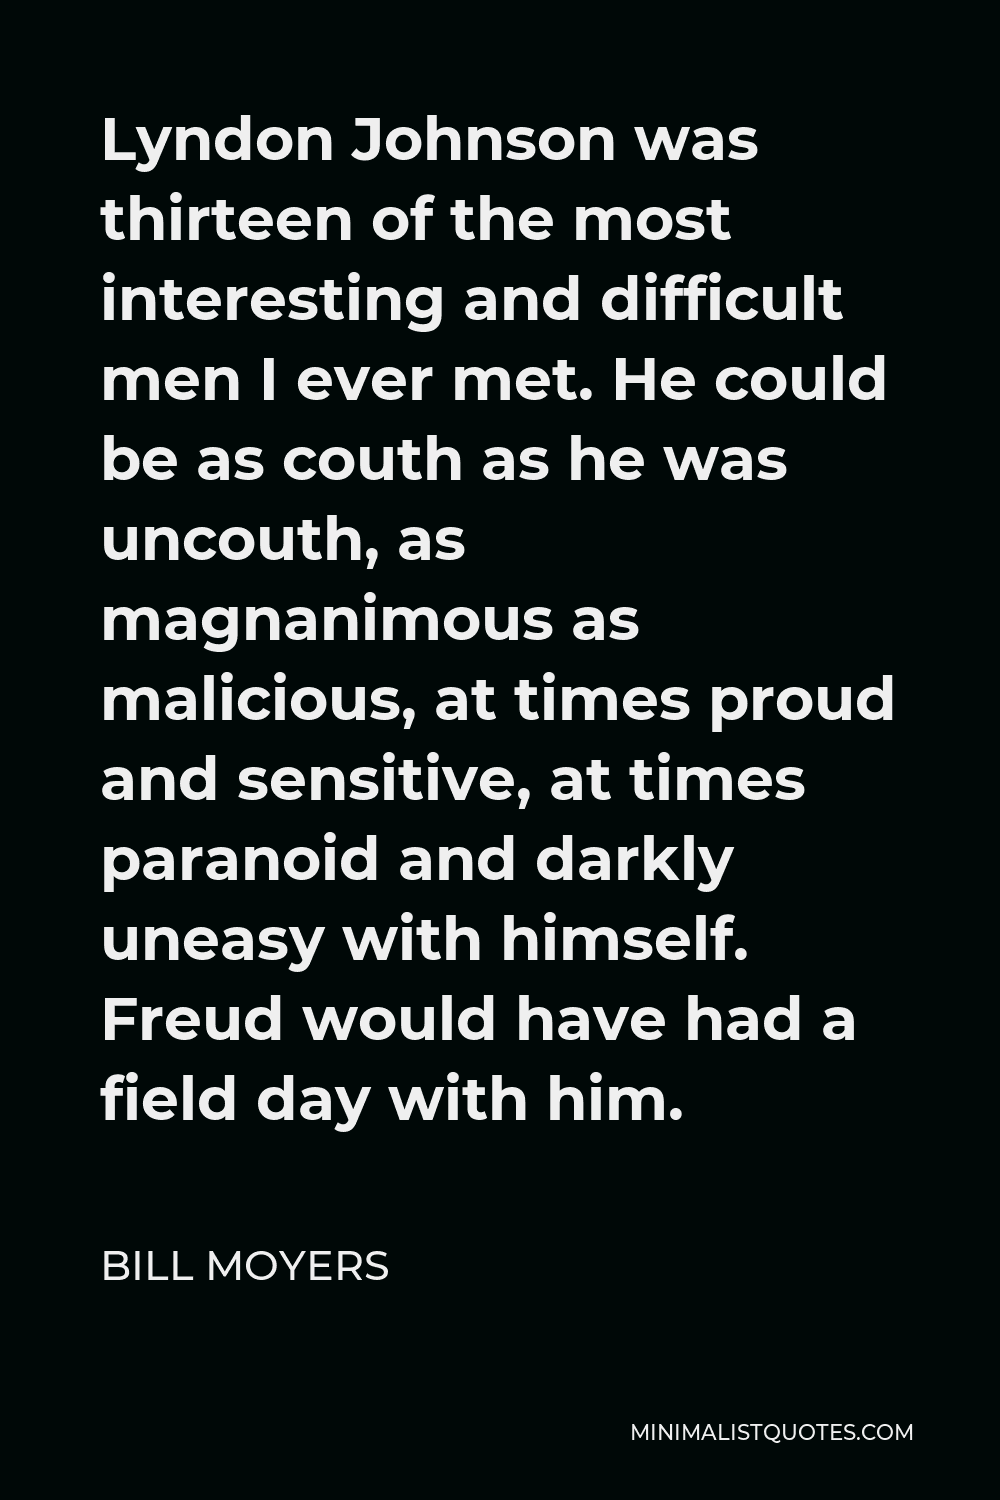 Bill Moyers Quote - Lyndon Johnson was thirteen of the most interesting and difficult men I ever met. He could be as couth as he was uncouth, as magnanimous as malicious, at times proud and sensitive, at times paranoid and darkly uneasy with himself. Freud would have had a field day with him.